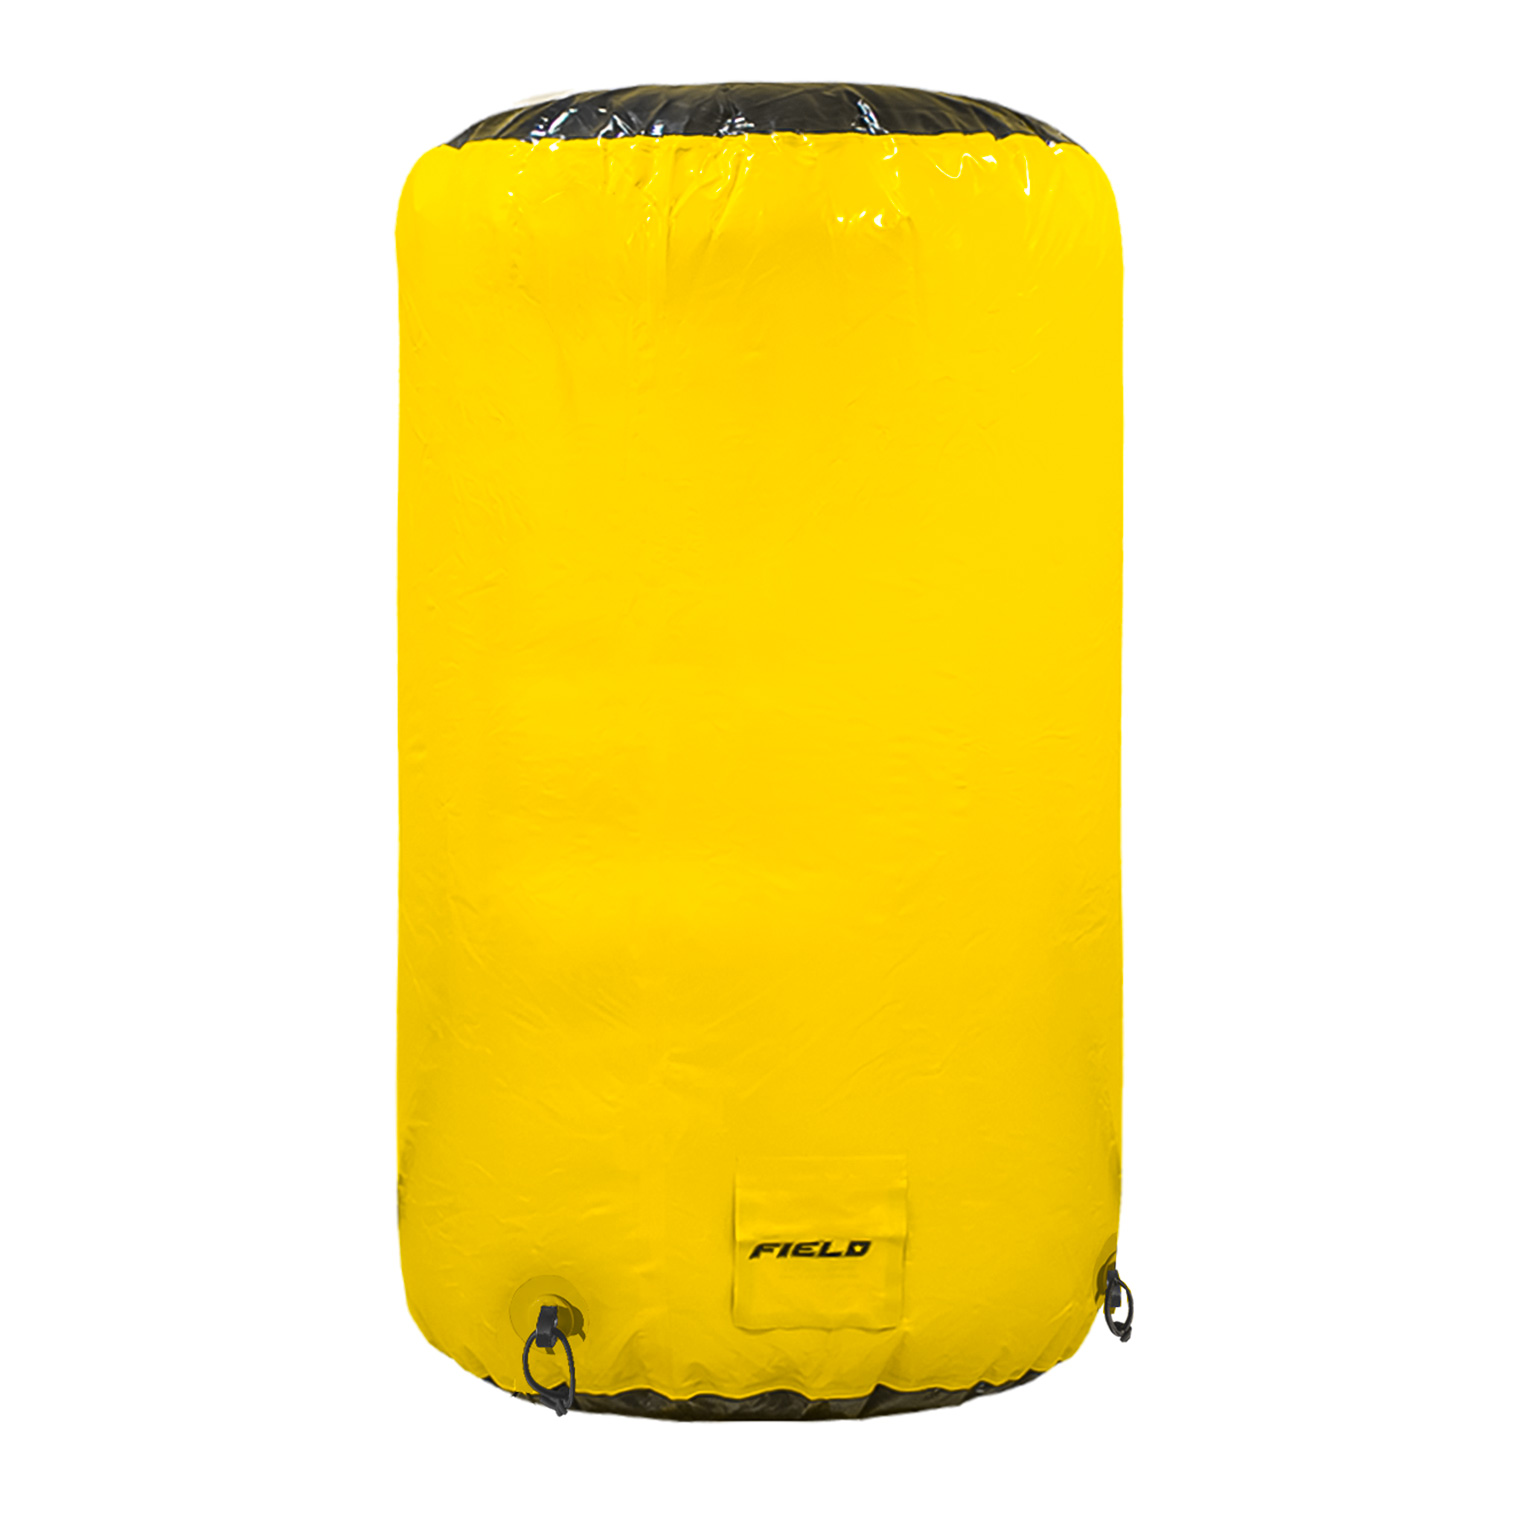 Paintball Bunker Cylinder